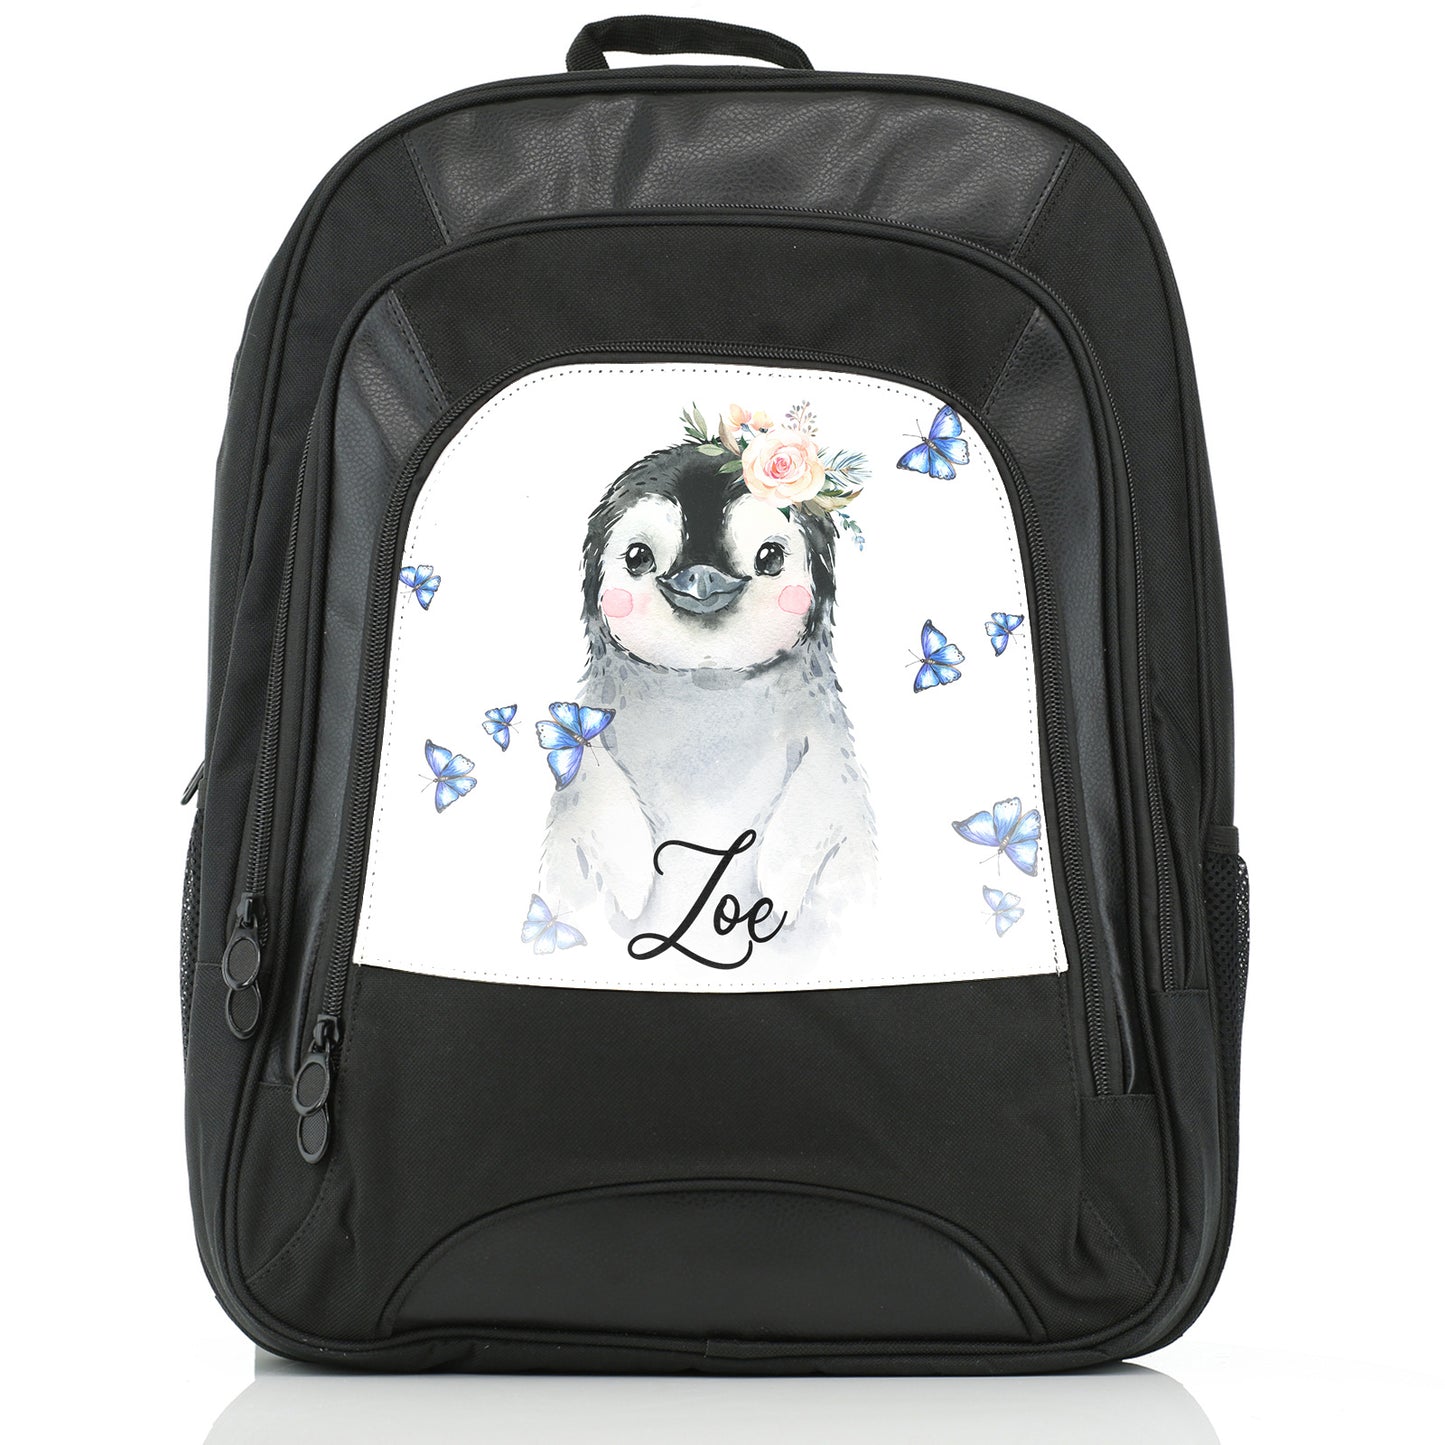 Personalised Large Multifunction Backpack with Grey Penguin Blue Butterflies and Cute Text